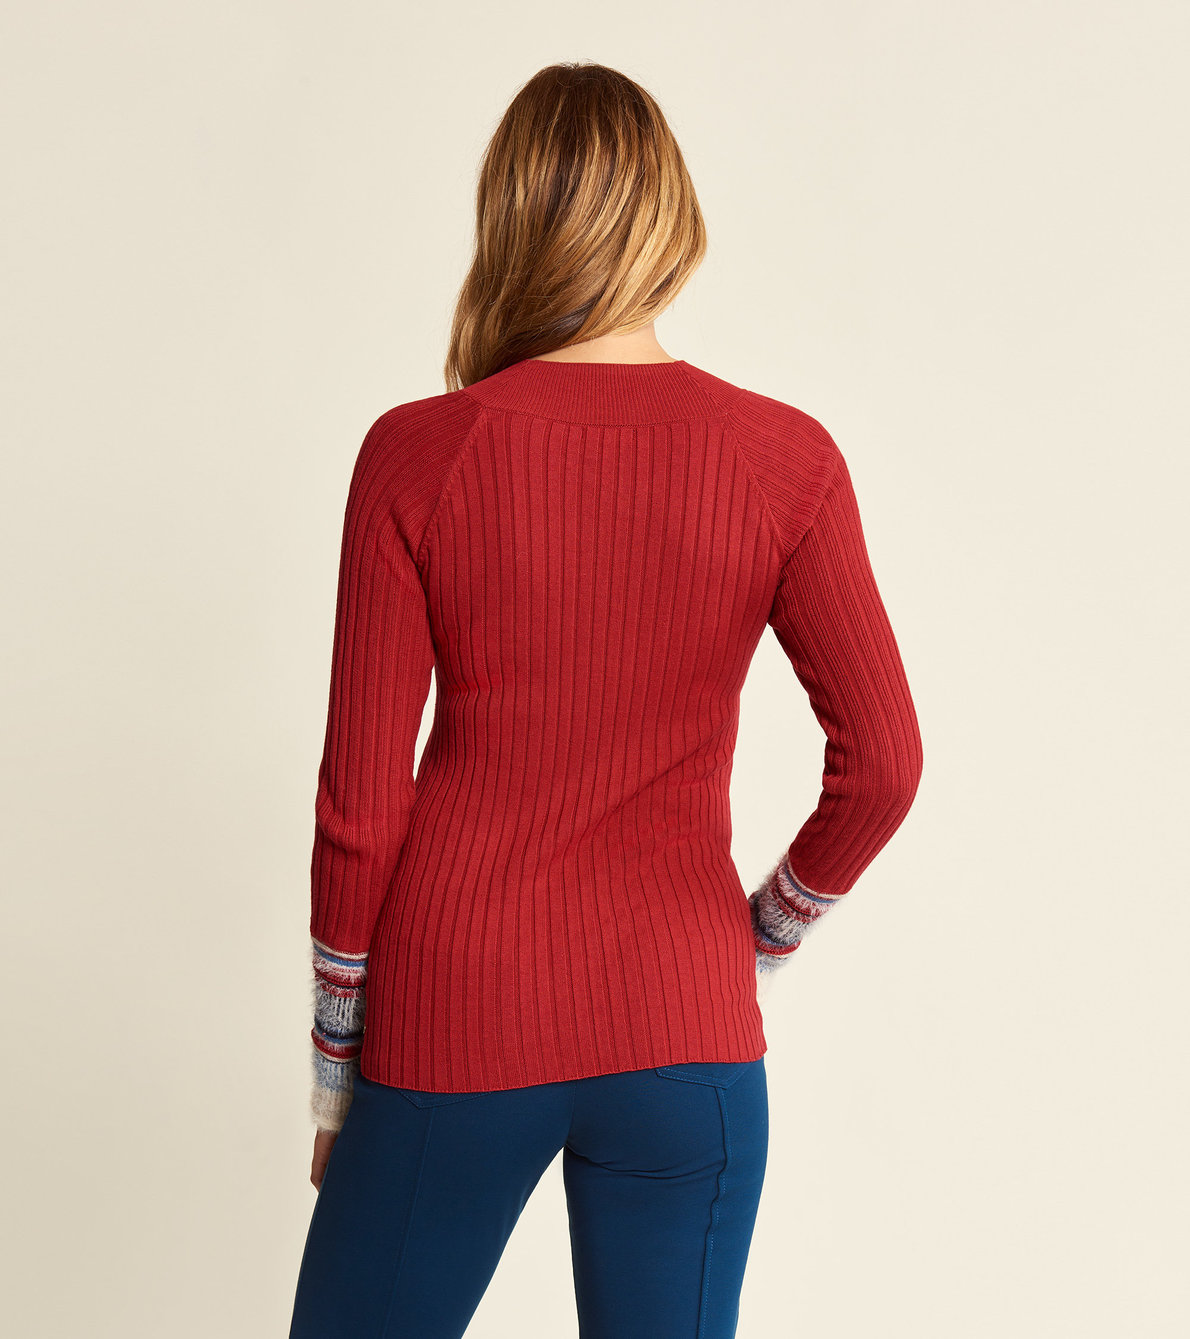 View larger image of Carey Knit Top - Pompeian Red